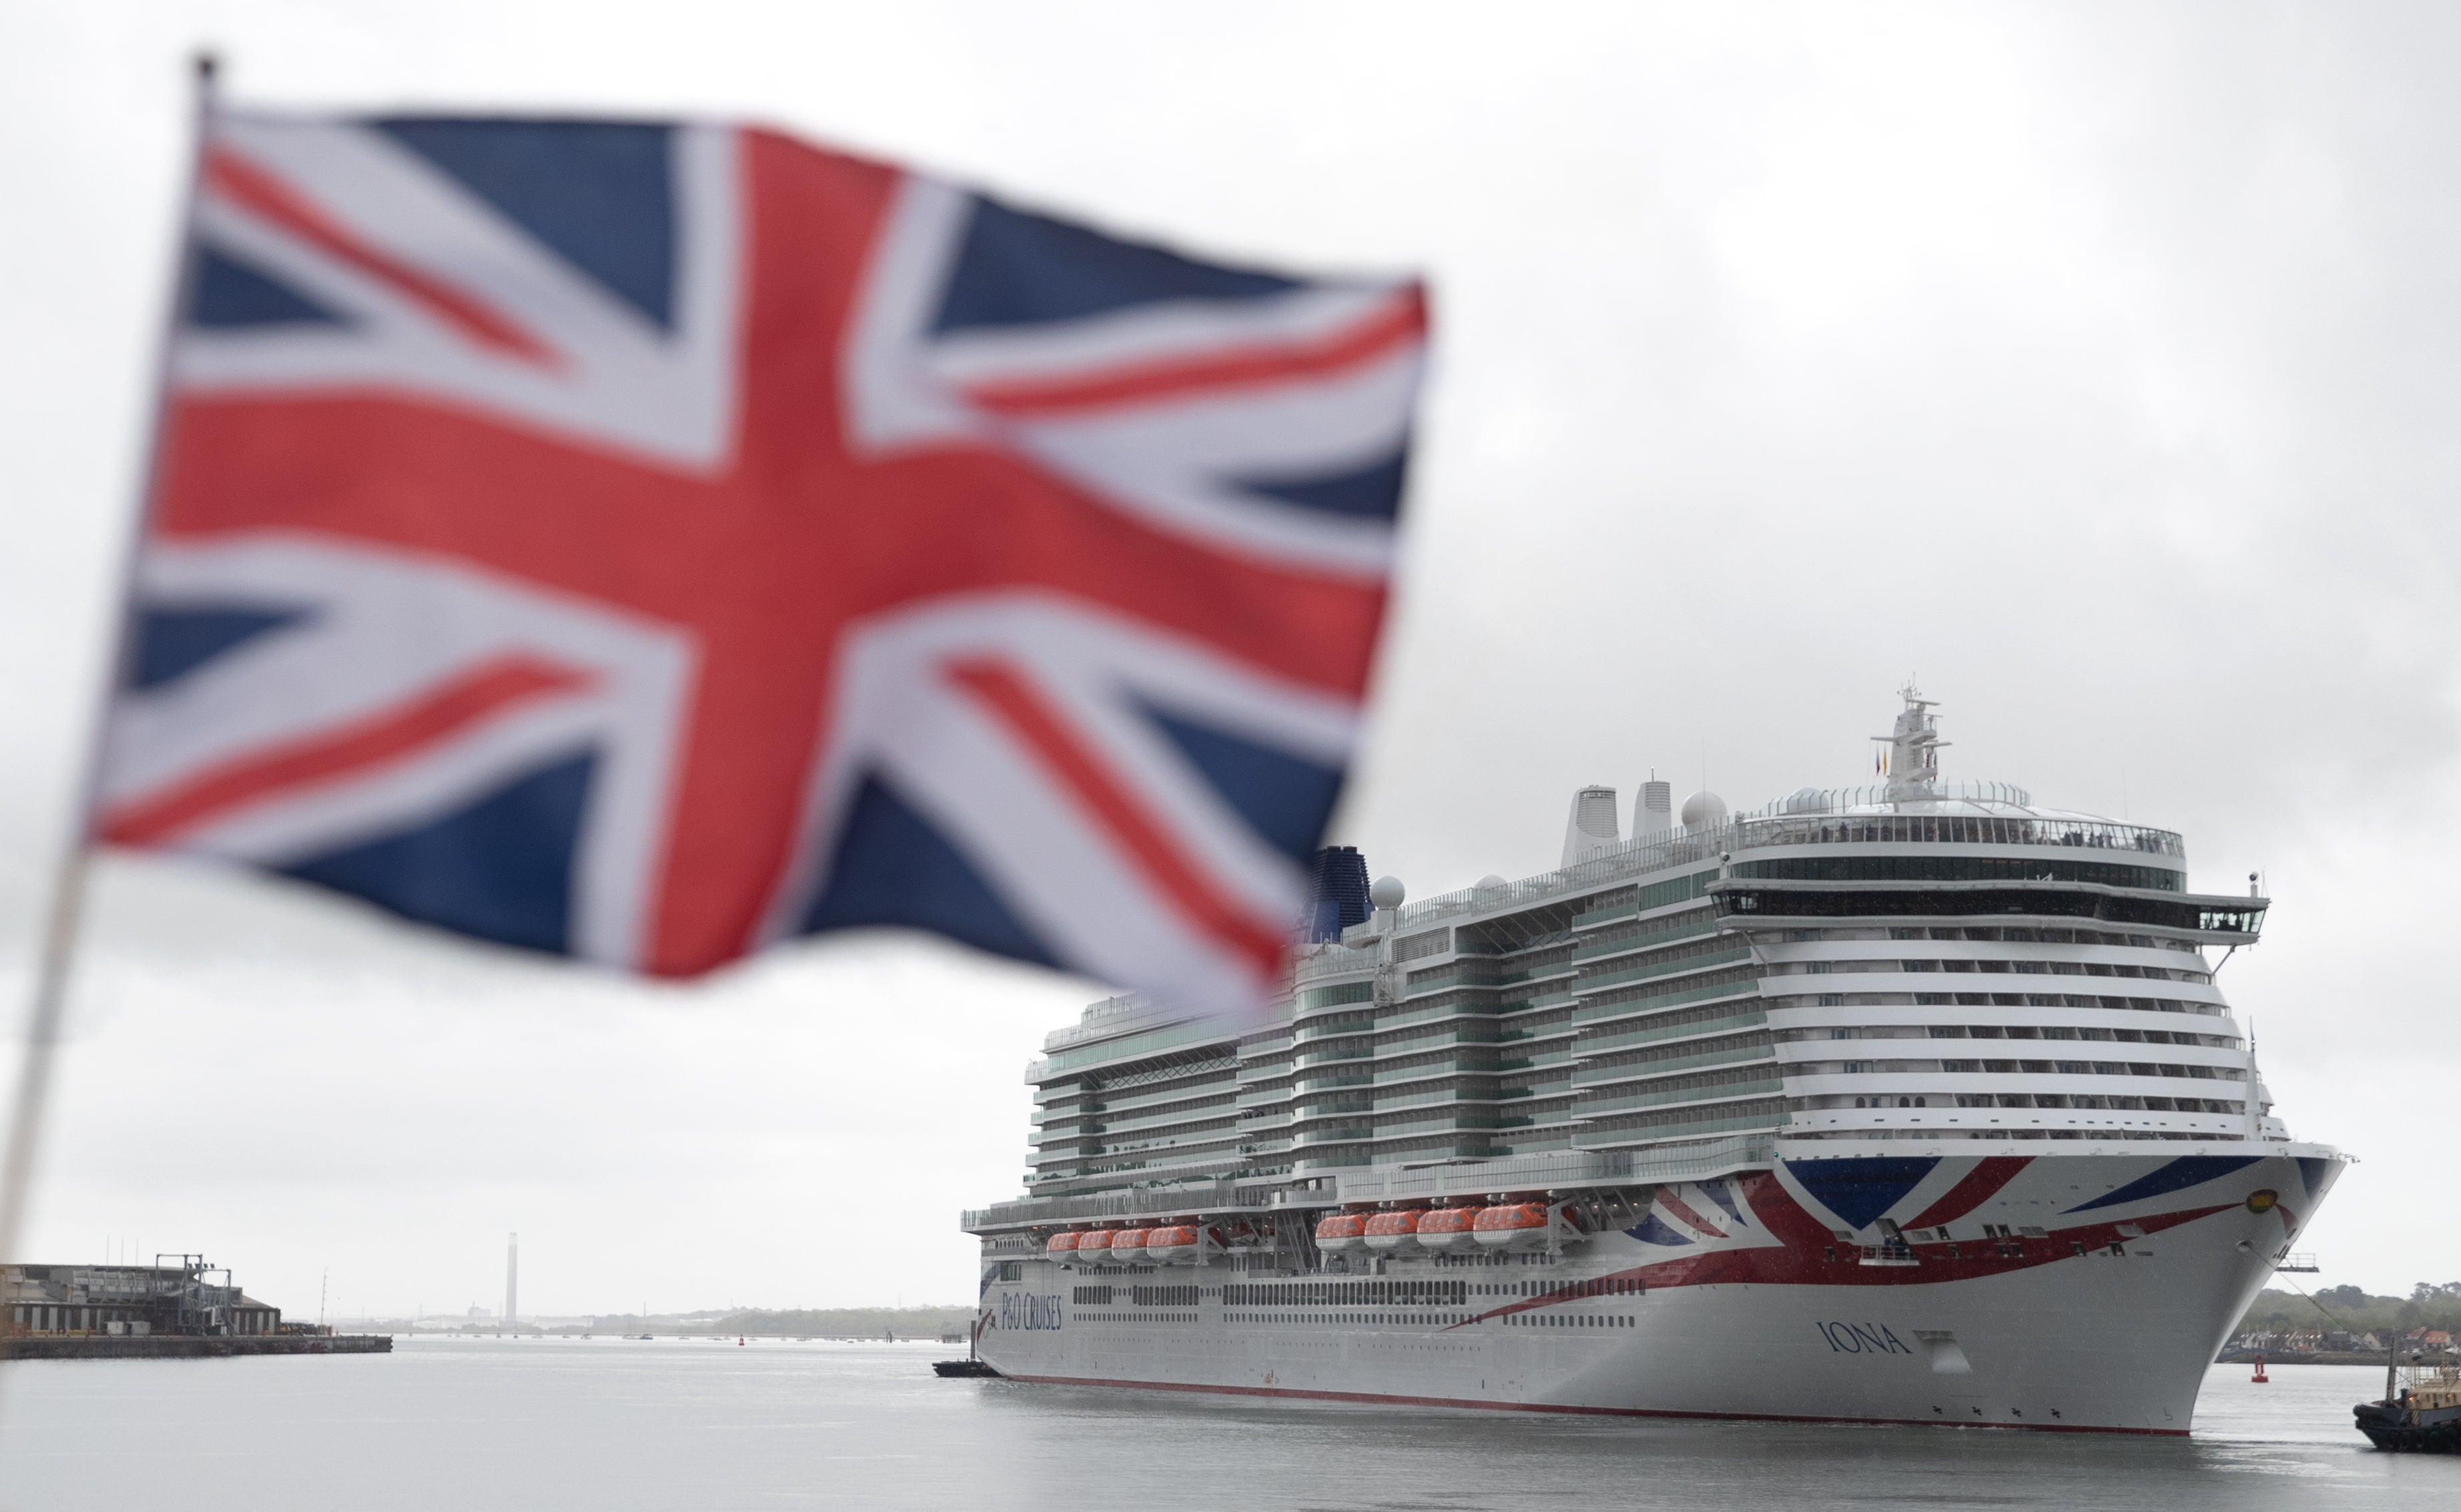 P&O Cruises says it experienced a boost in bookings following widespread criticism of P&O Ferries